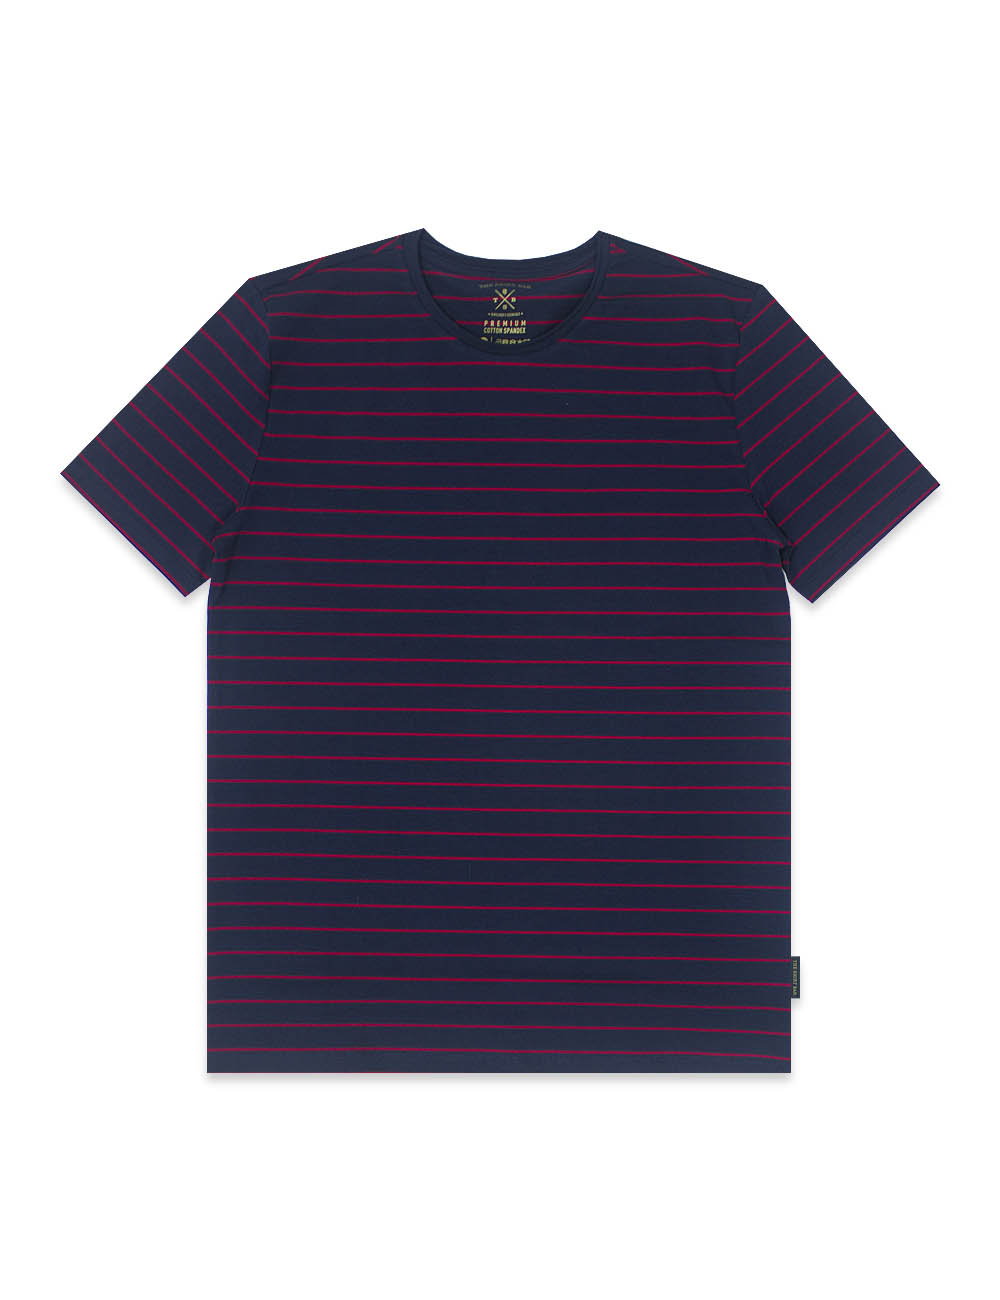 Navy With Red Stripe Raw Edge Short Sleeve T-shirt - TS2A8.5